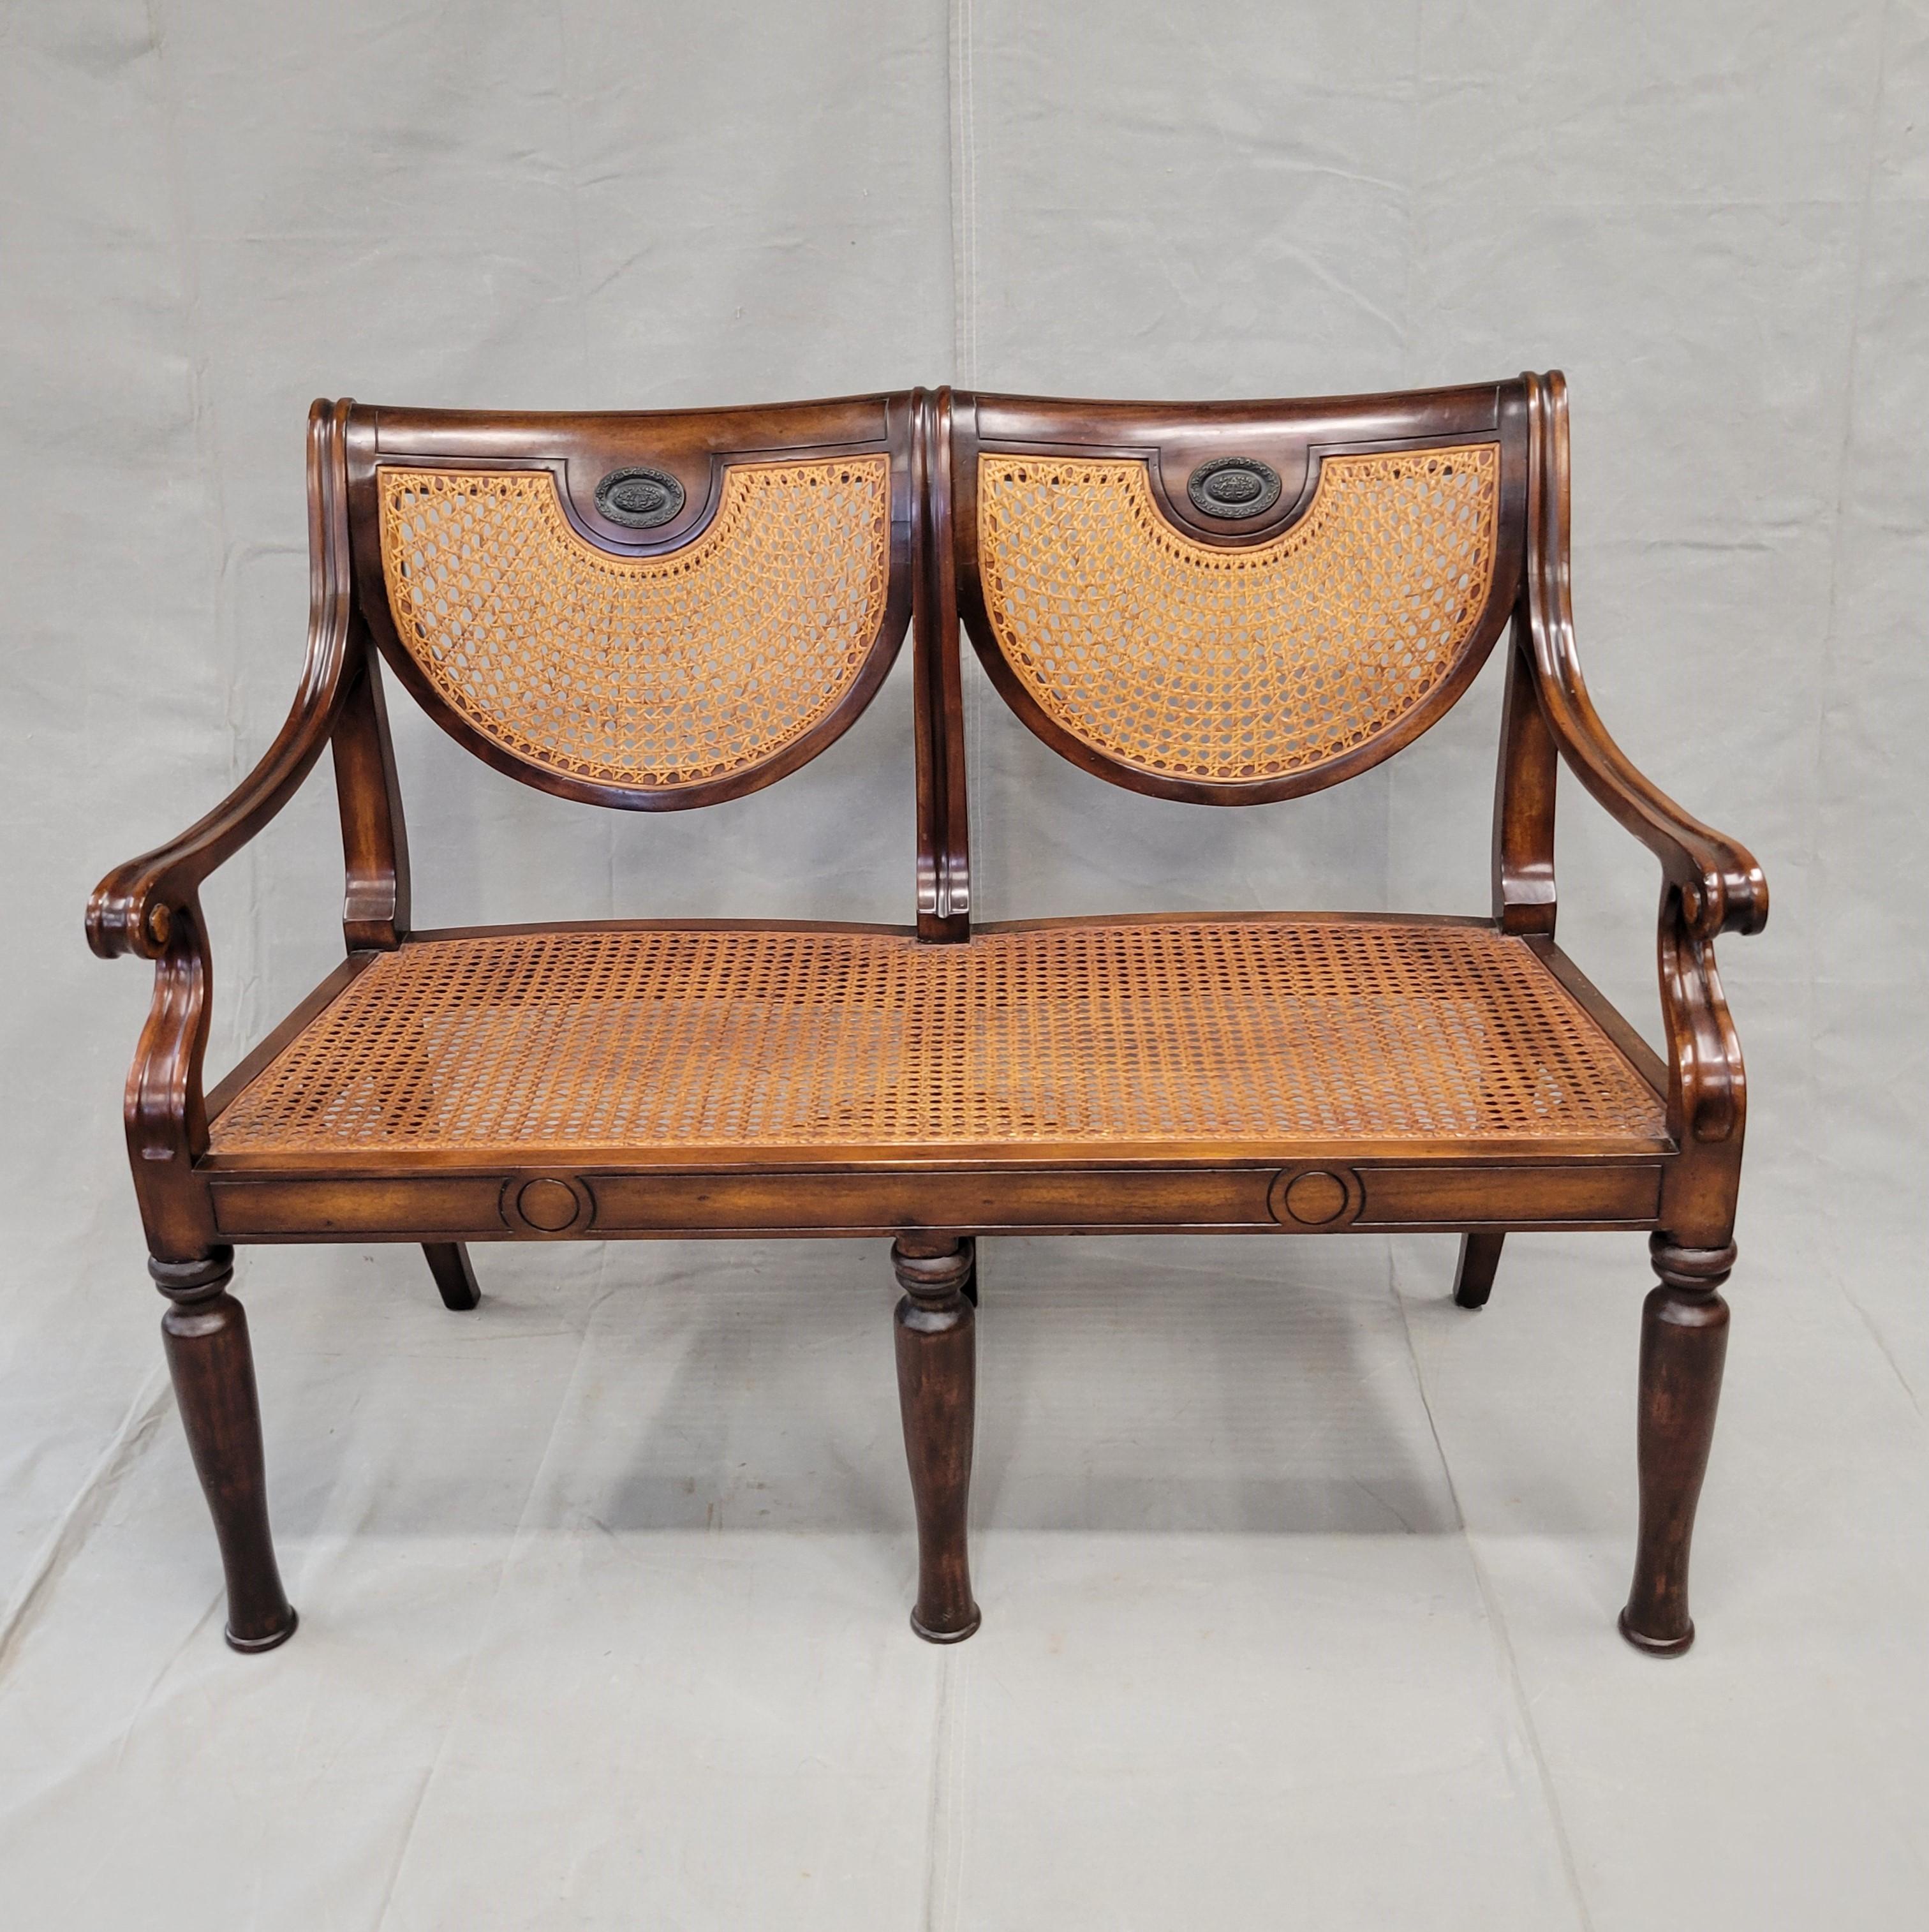 Hand-Crafted Vintage Theodore Alexander Regency Caned Mahogany Settee With Down Cushion For Sale